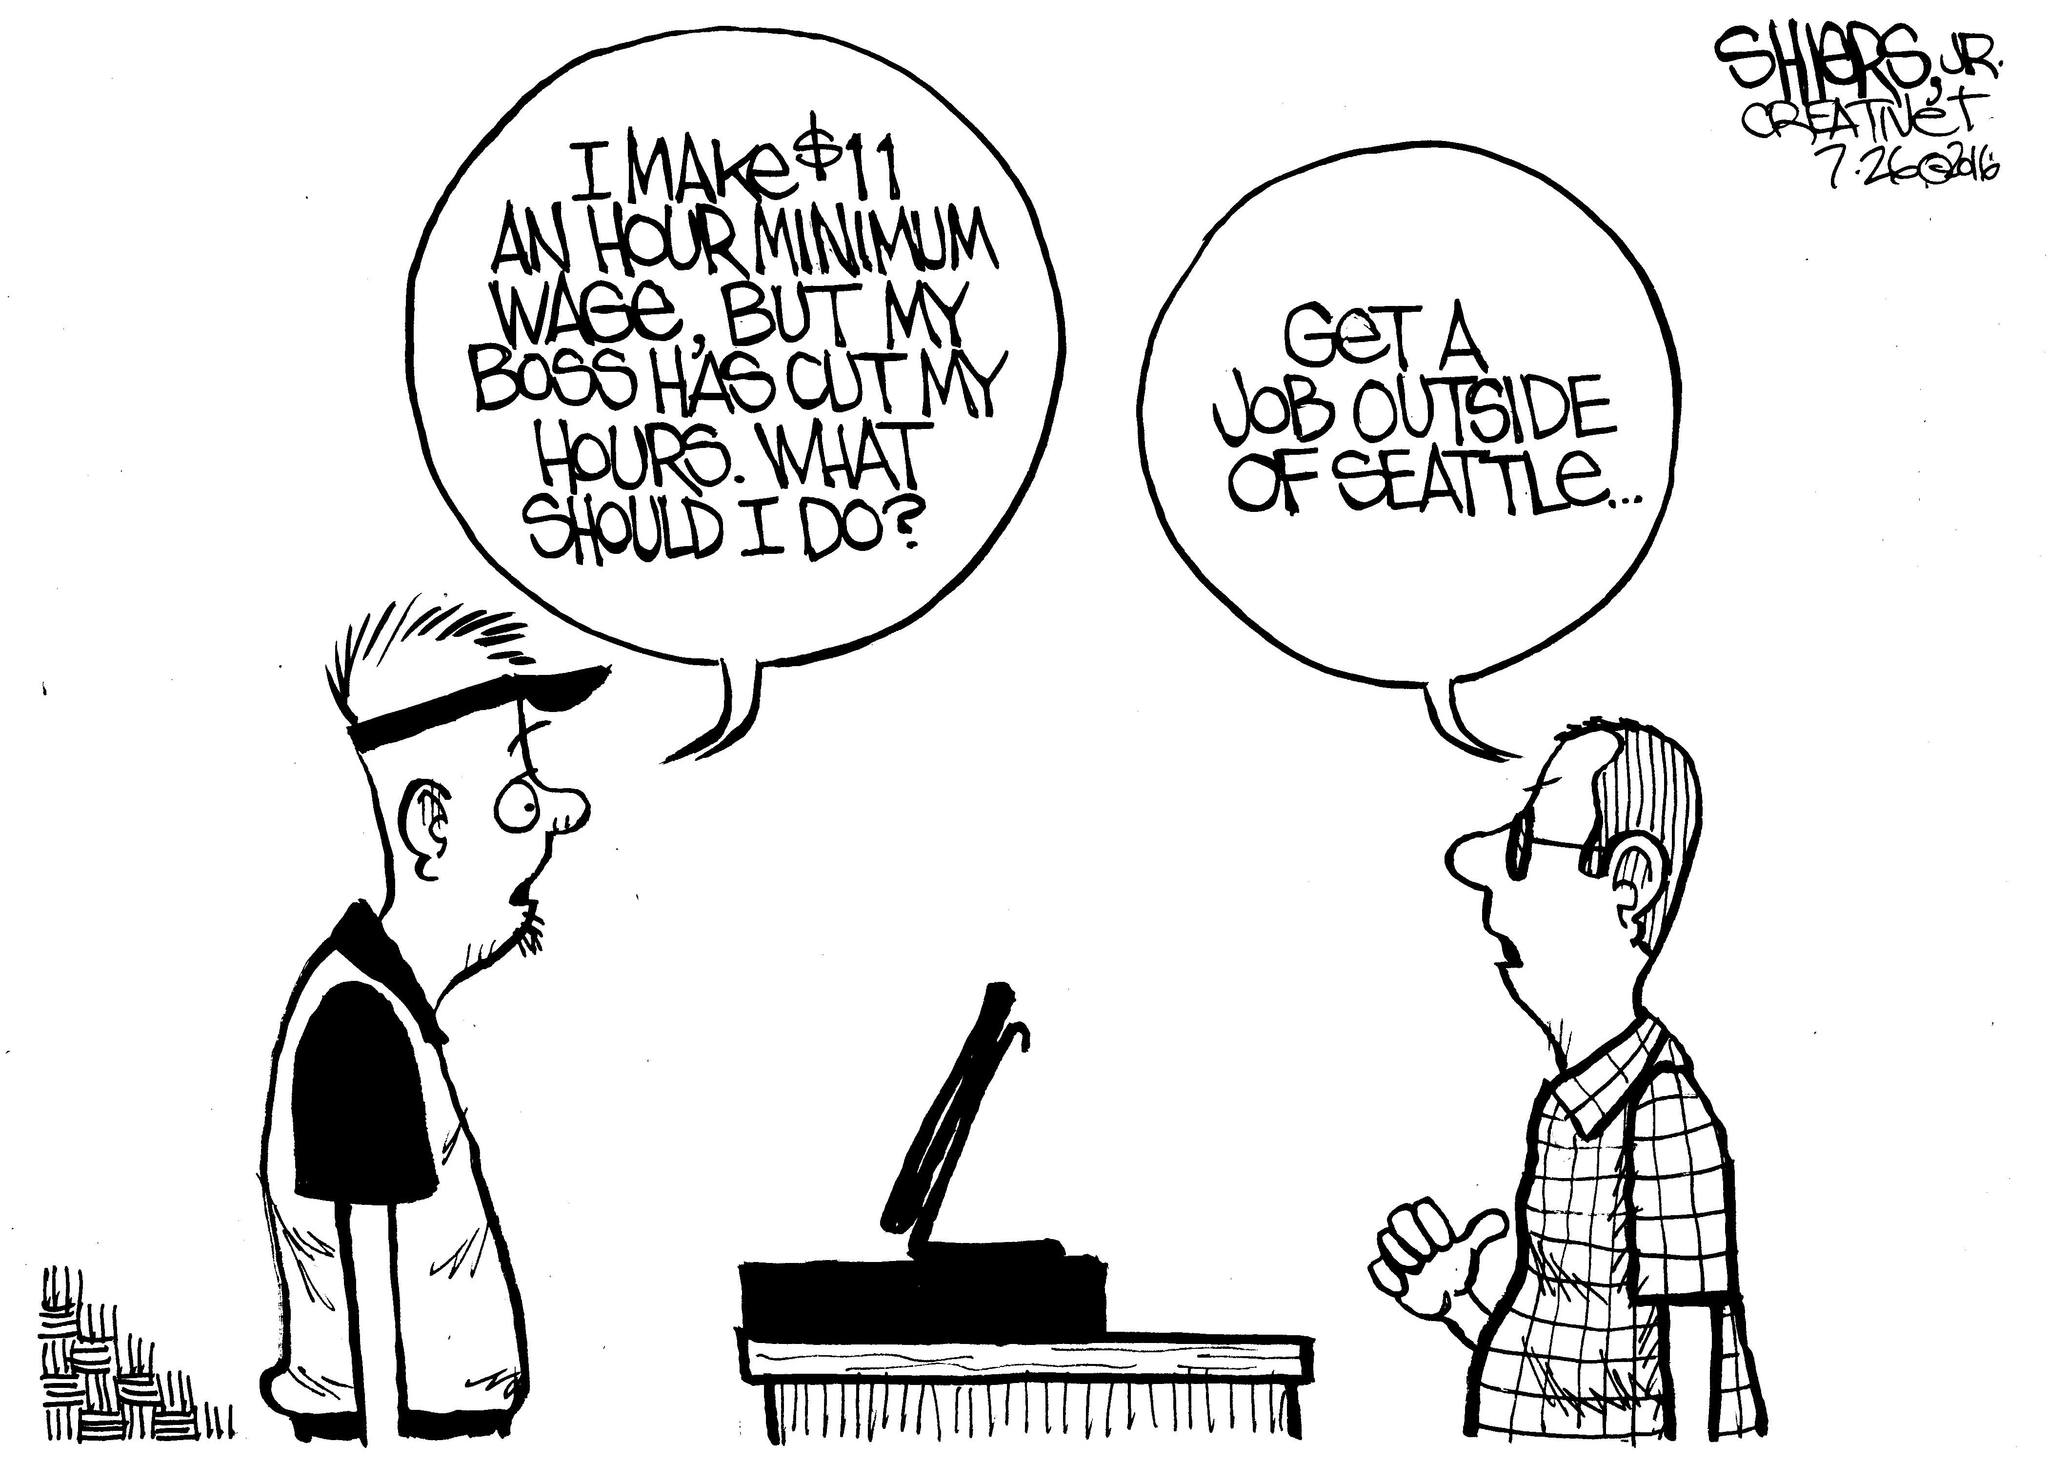 Get a job outside of Seattle | Cartoon for July 27 - Frank Shiers